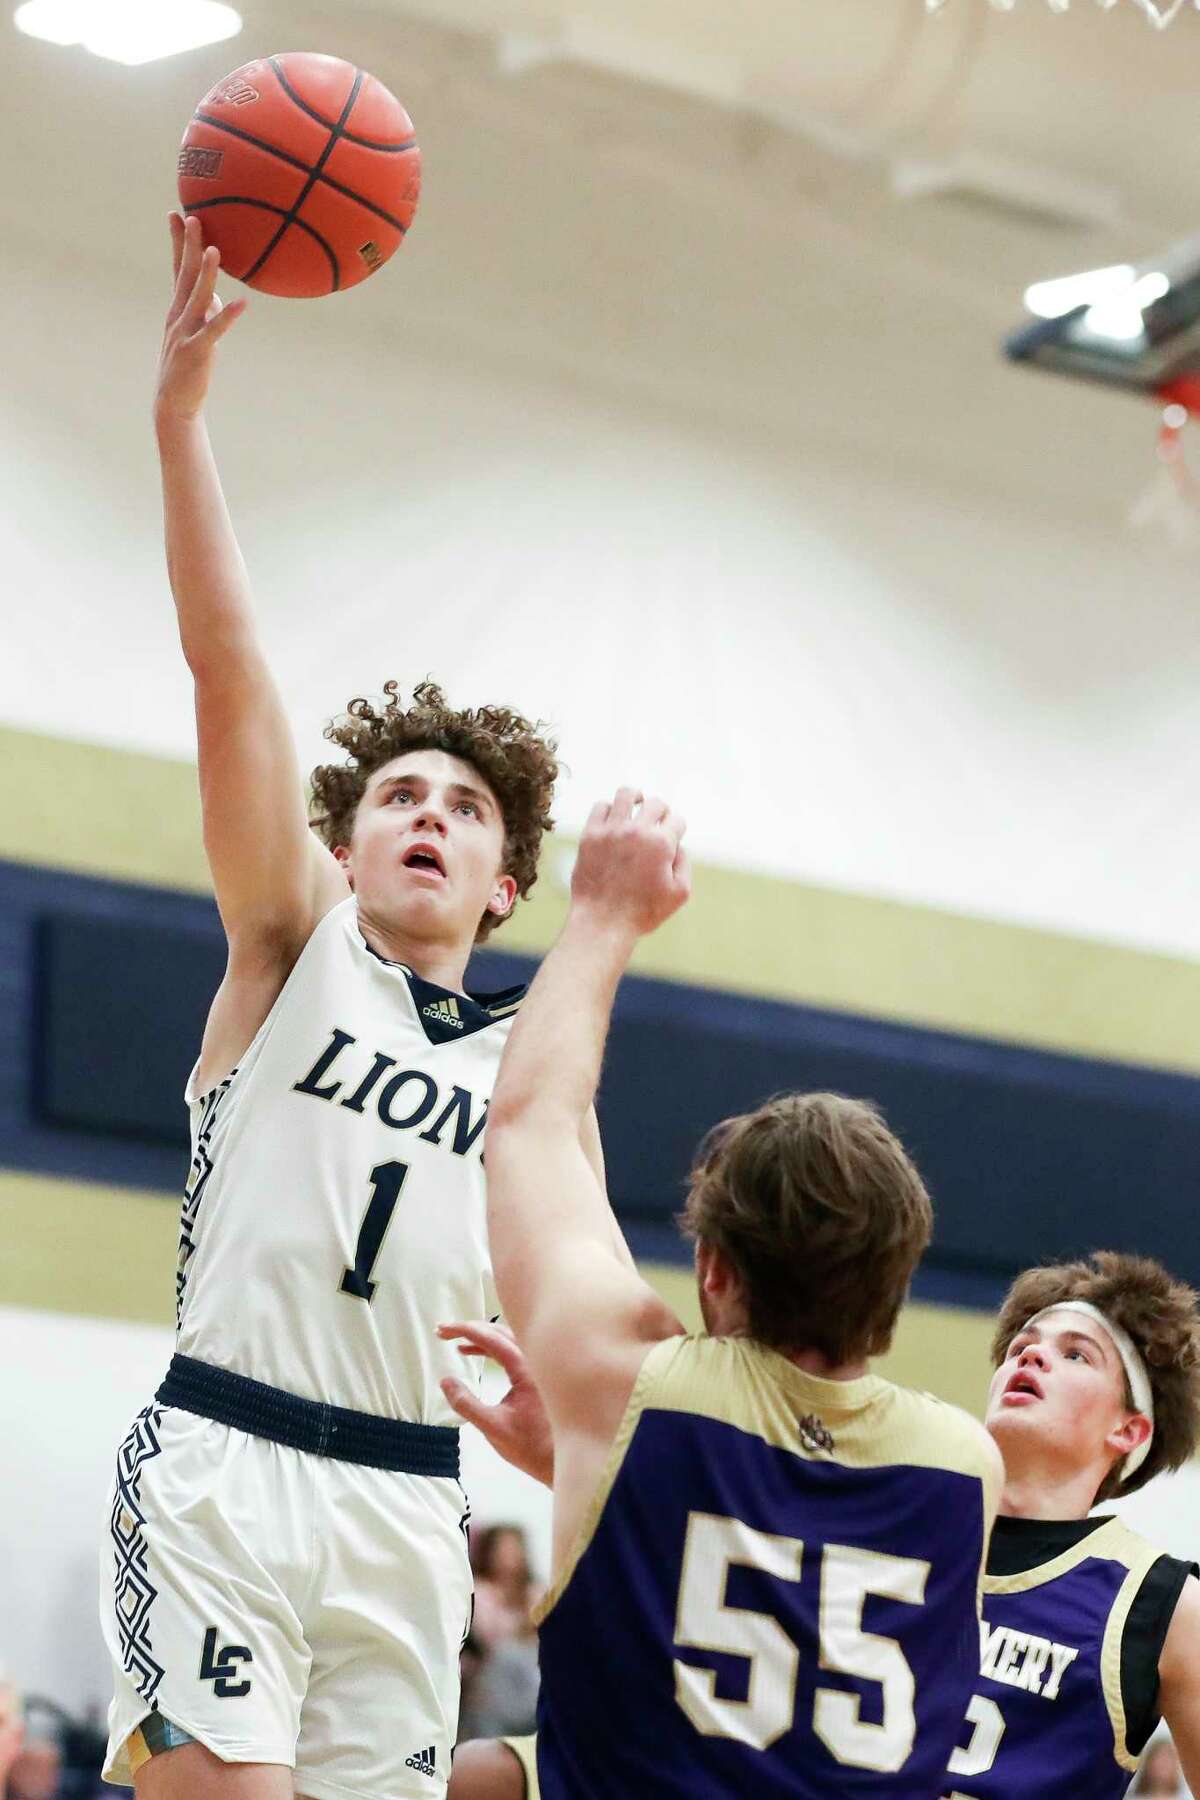 Lake Creek shooting guard Jett Sutton (1) shoots over Montgomery center Isaak Nelson (55) in the second quarter of a District 21-5A high school basketball game at Lake Creek High School, Friday, Jan. 20, 2023, in Montgomery.